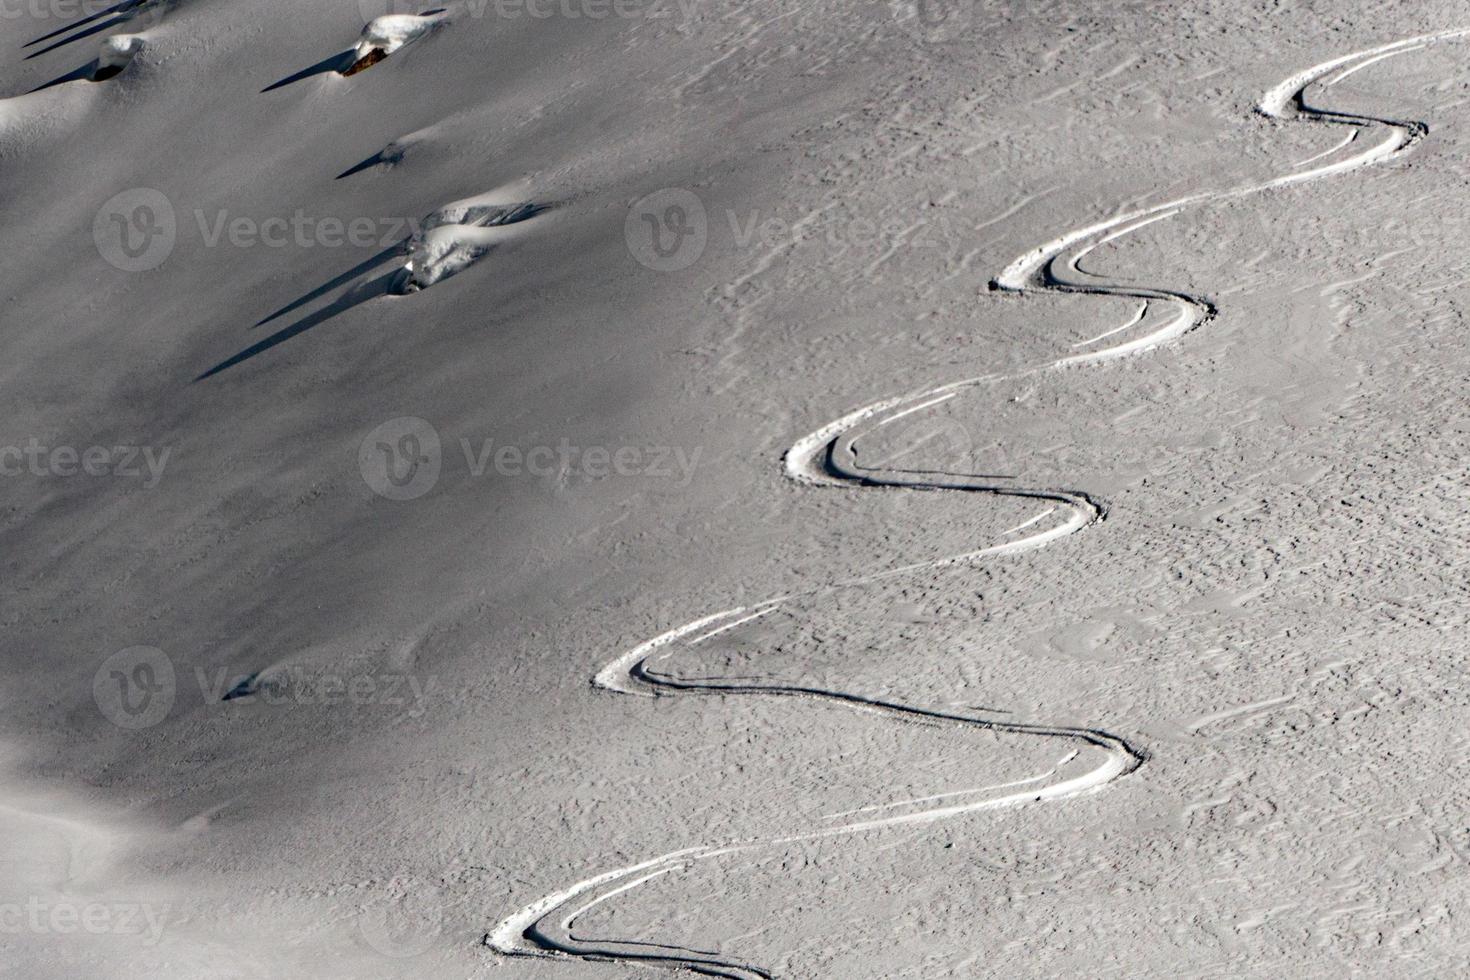 backcountry skiing trails snow detail photo